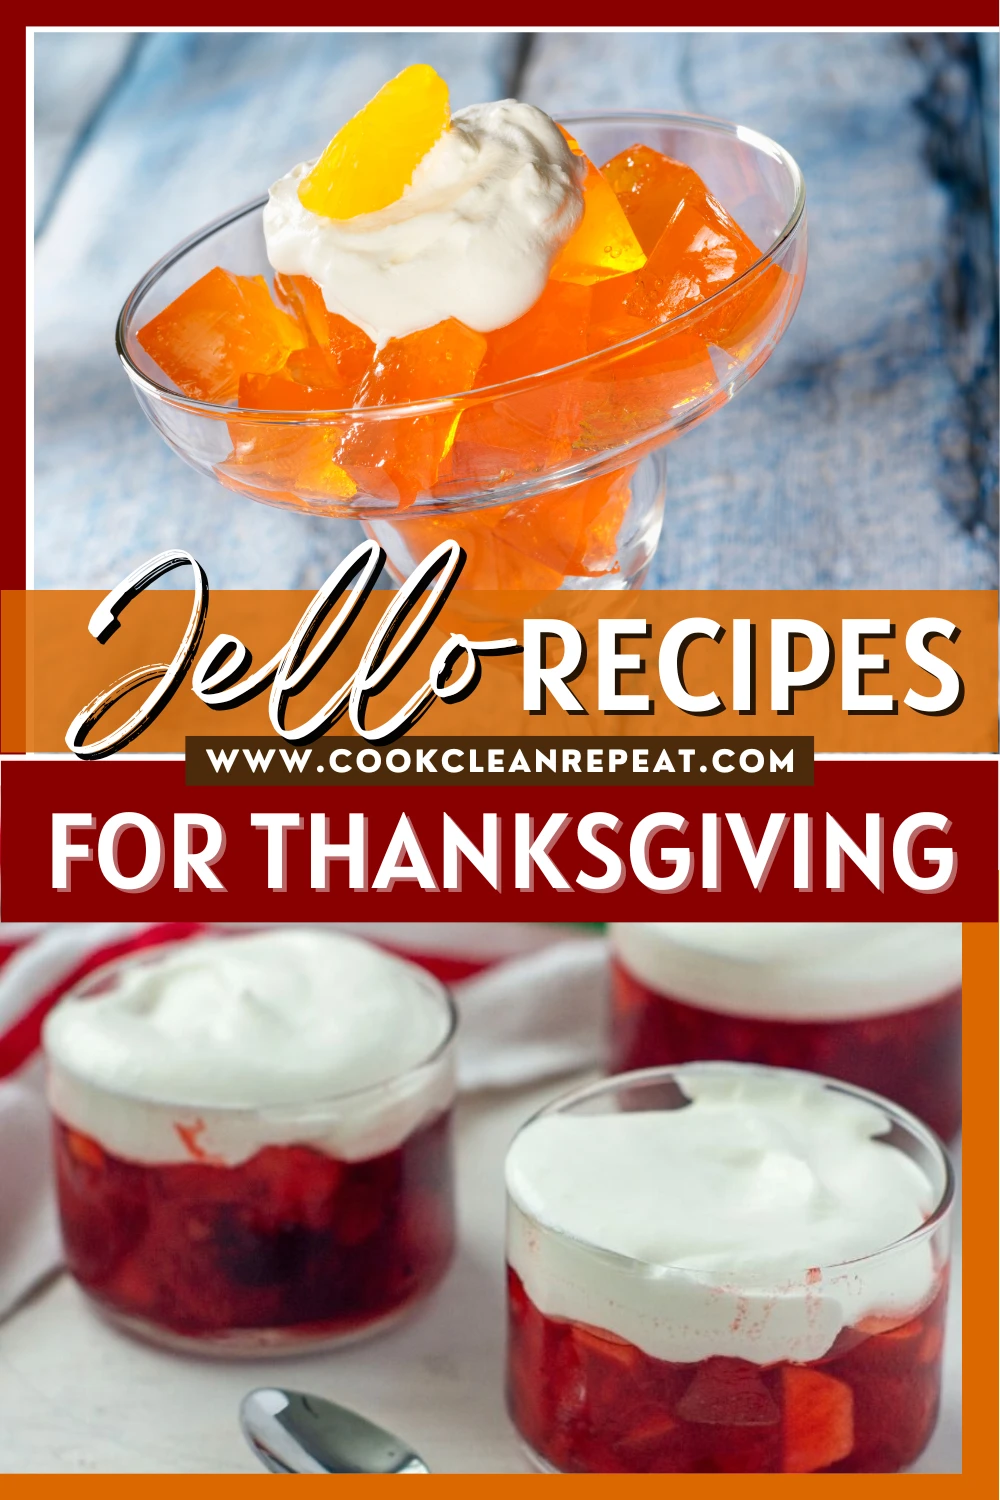 https://cookcleanrepeat.com/wp-content/uploads/2022/07/Jello-Recipes-for-Thanksgiving-Pin.png.webp